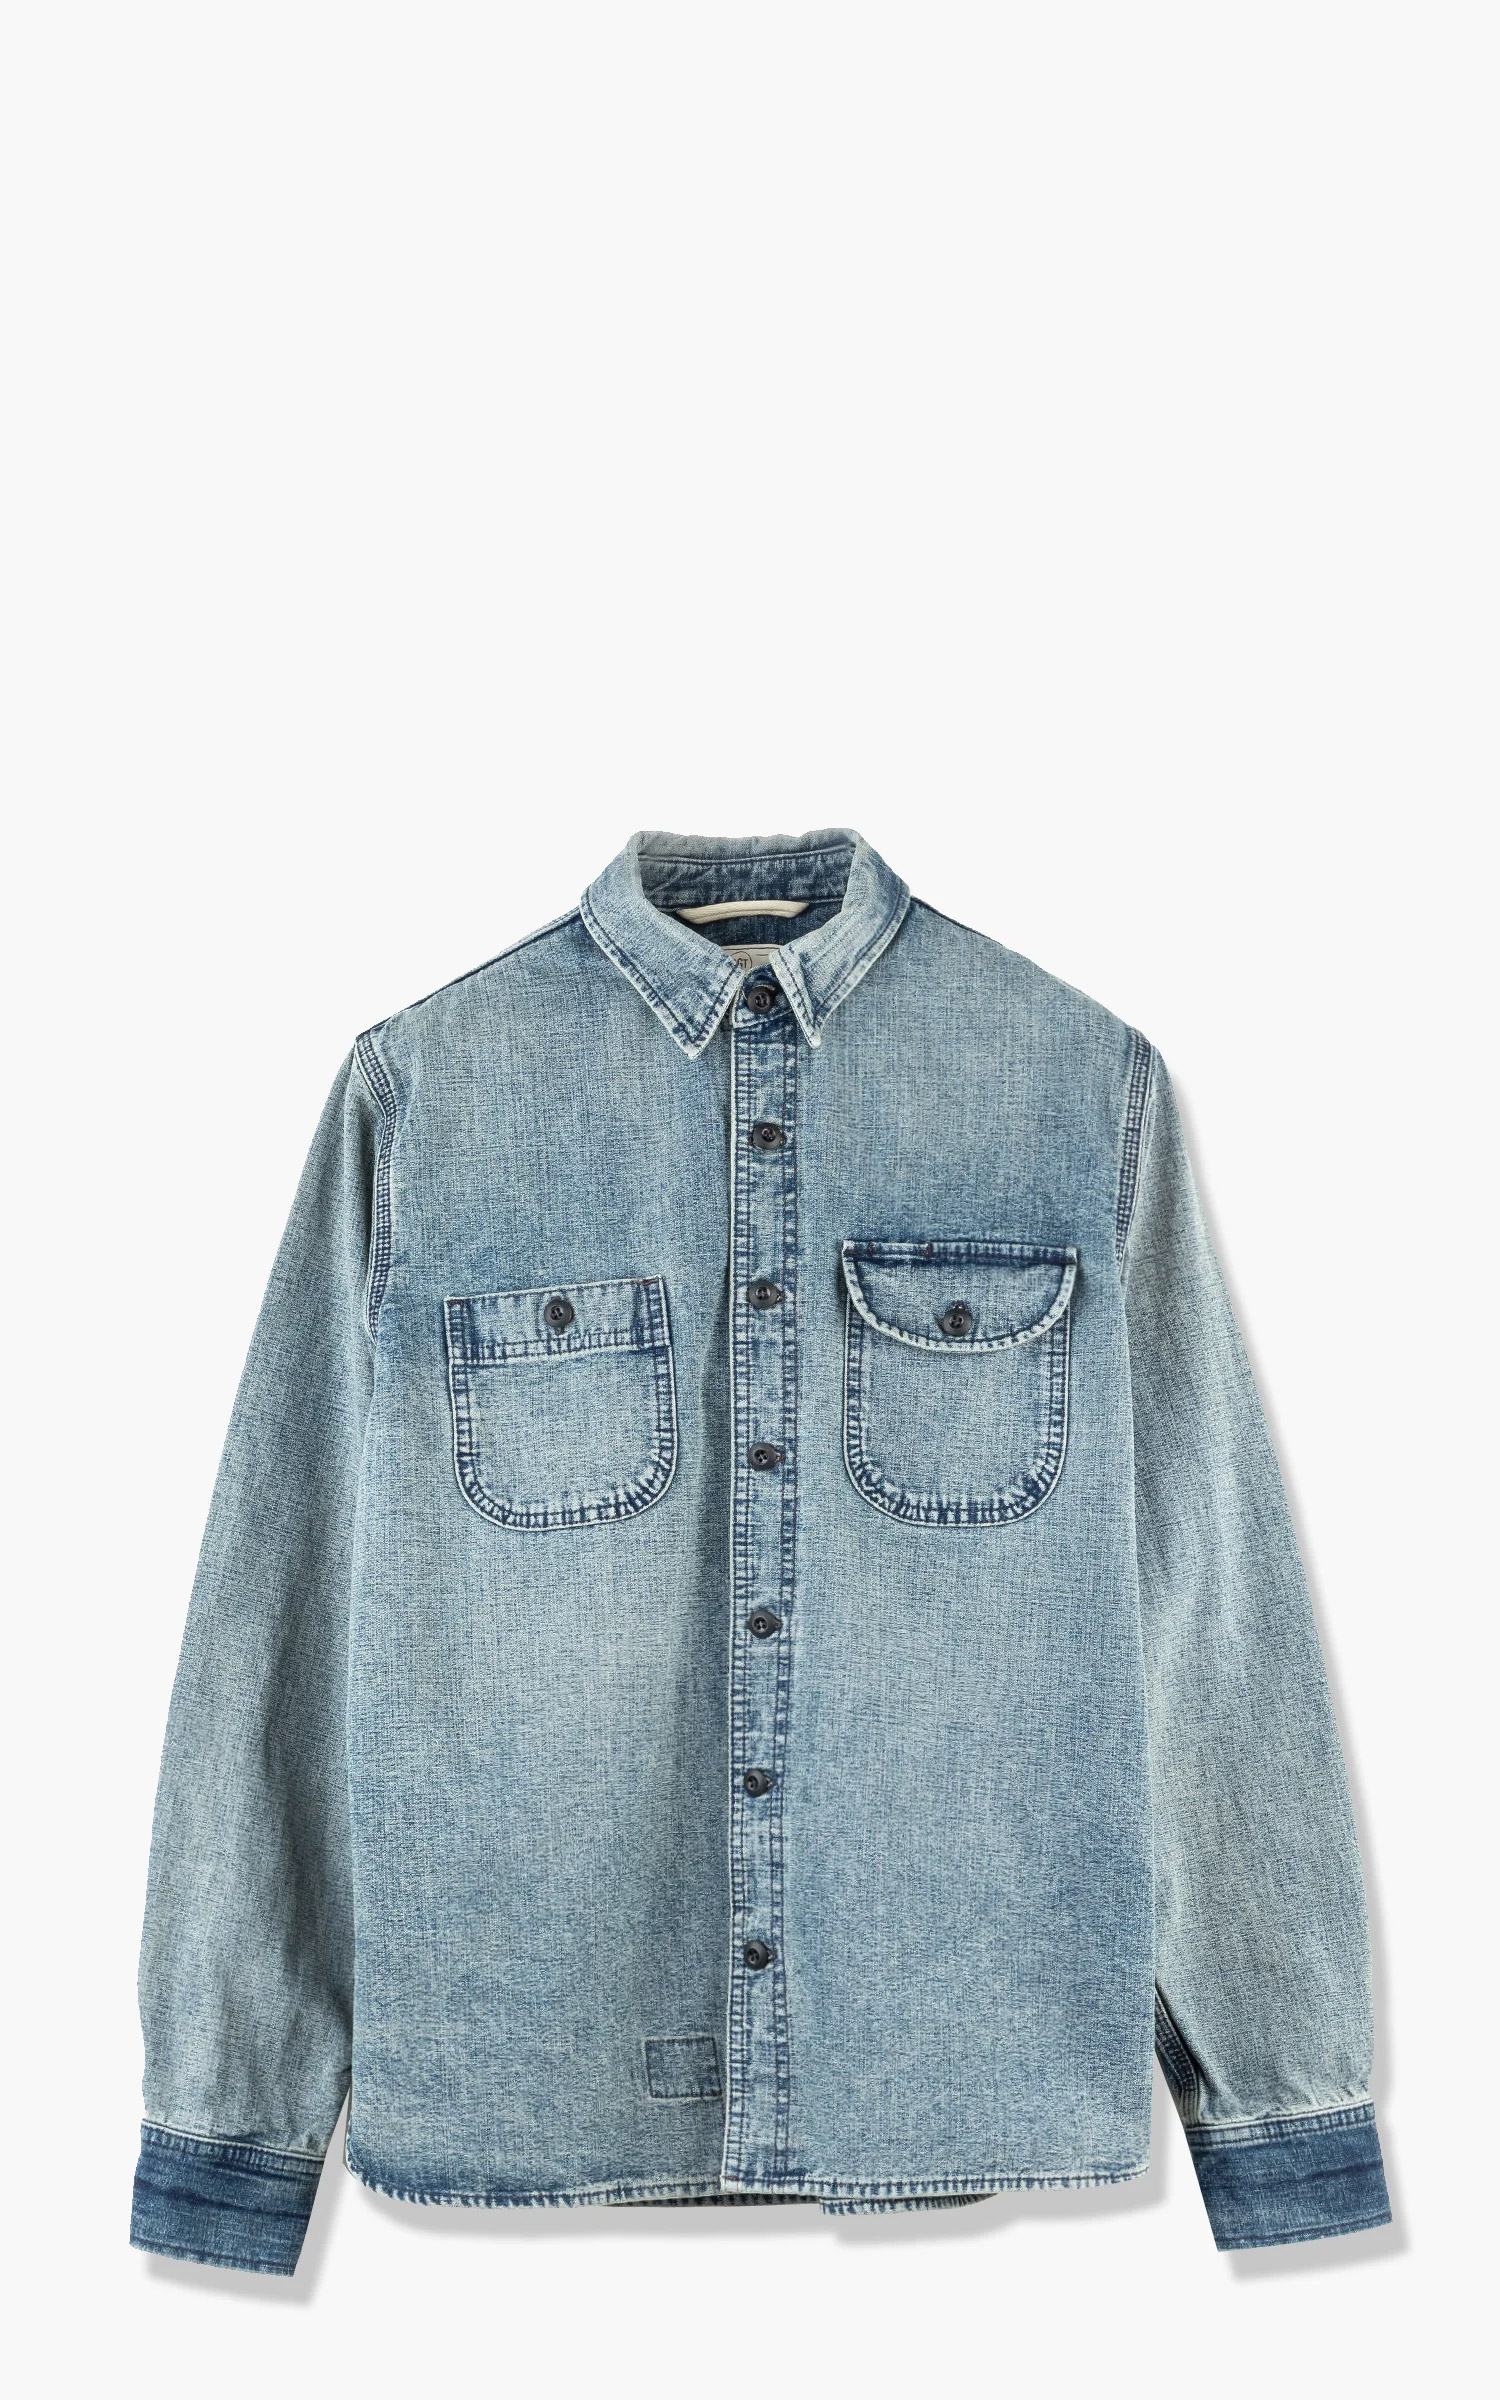 Rogue Territory Work Shirt Washed Out Indigo Selvedge Canvas | Cultizm